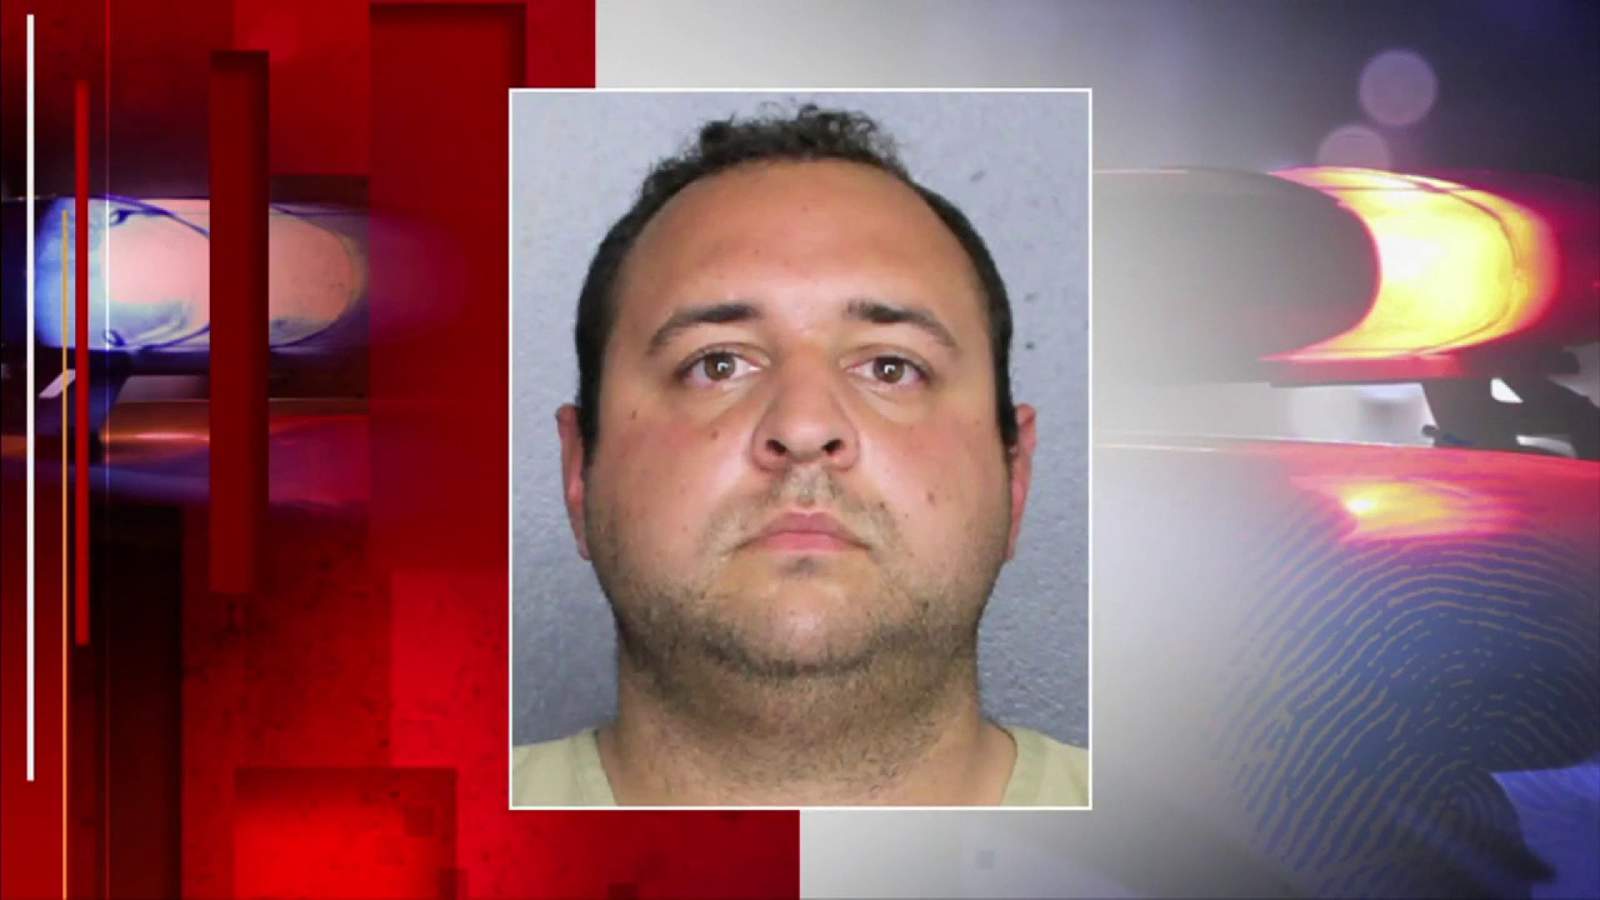 Fort Lauderdale police officer, Gibbons asst. wrestling coach, accused of online sex chats with minor